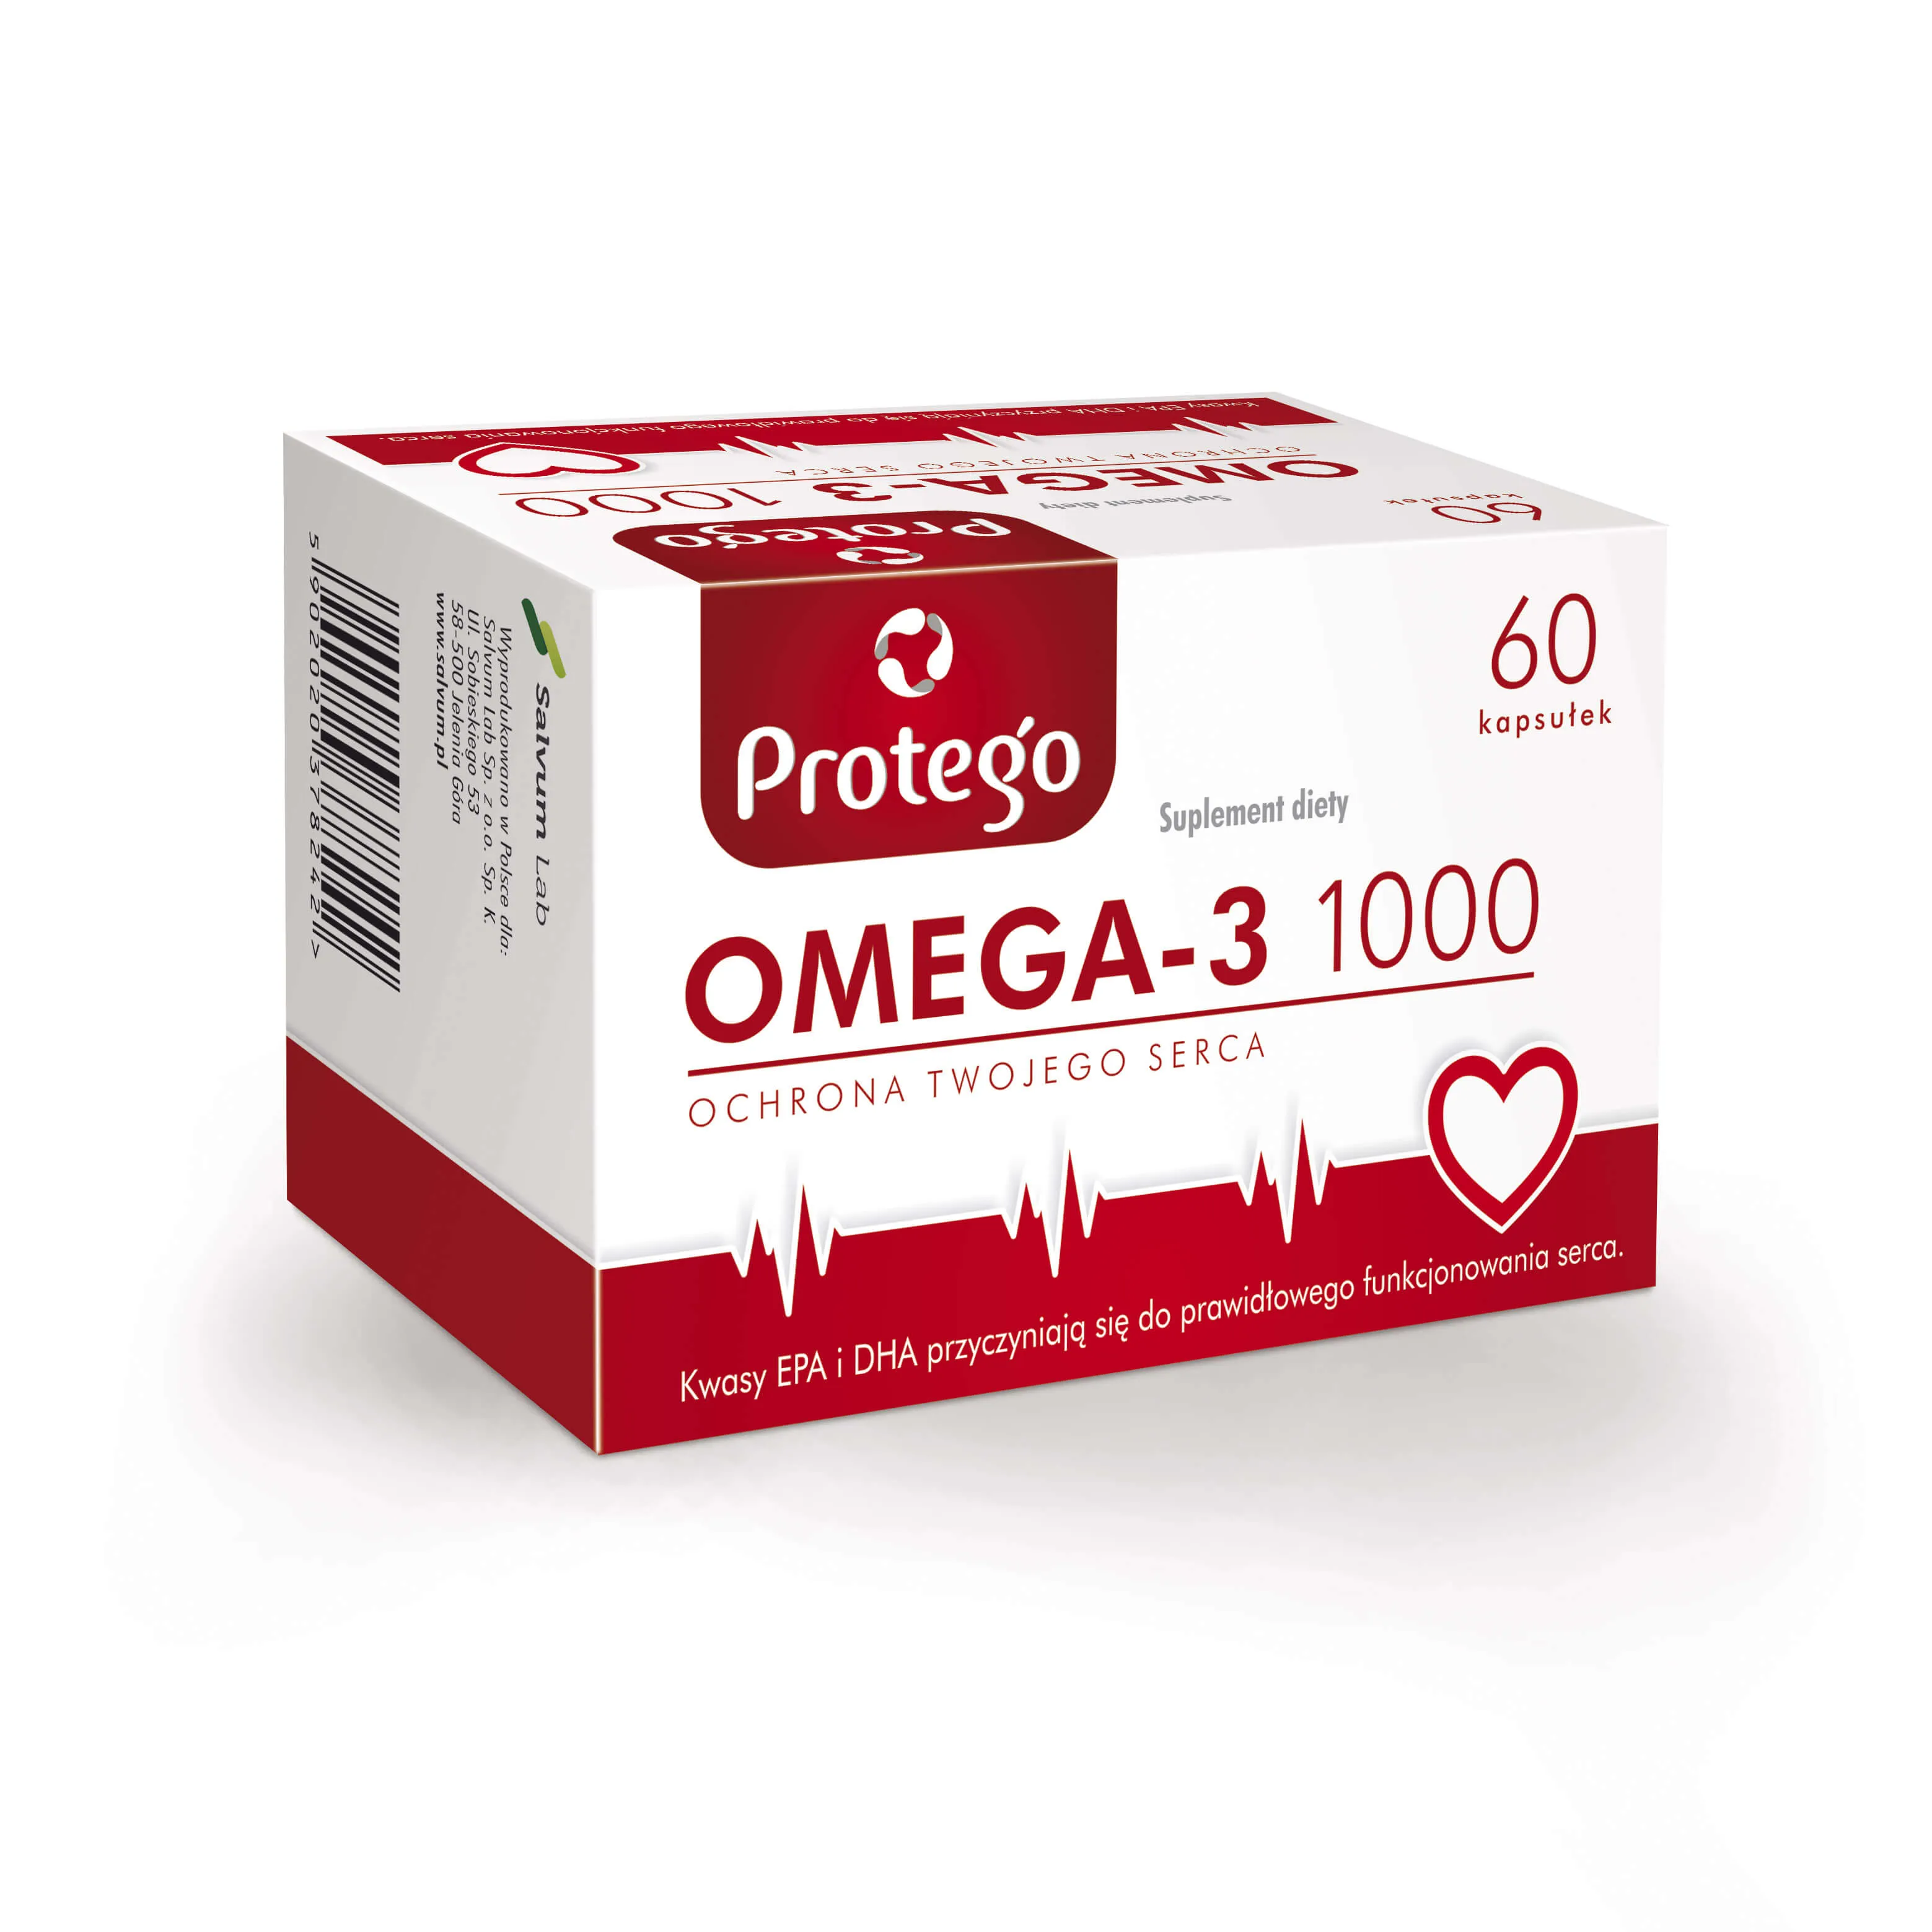 Protego Omega-3 1000, suplement diety, 60 kapsułek